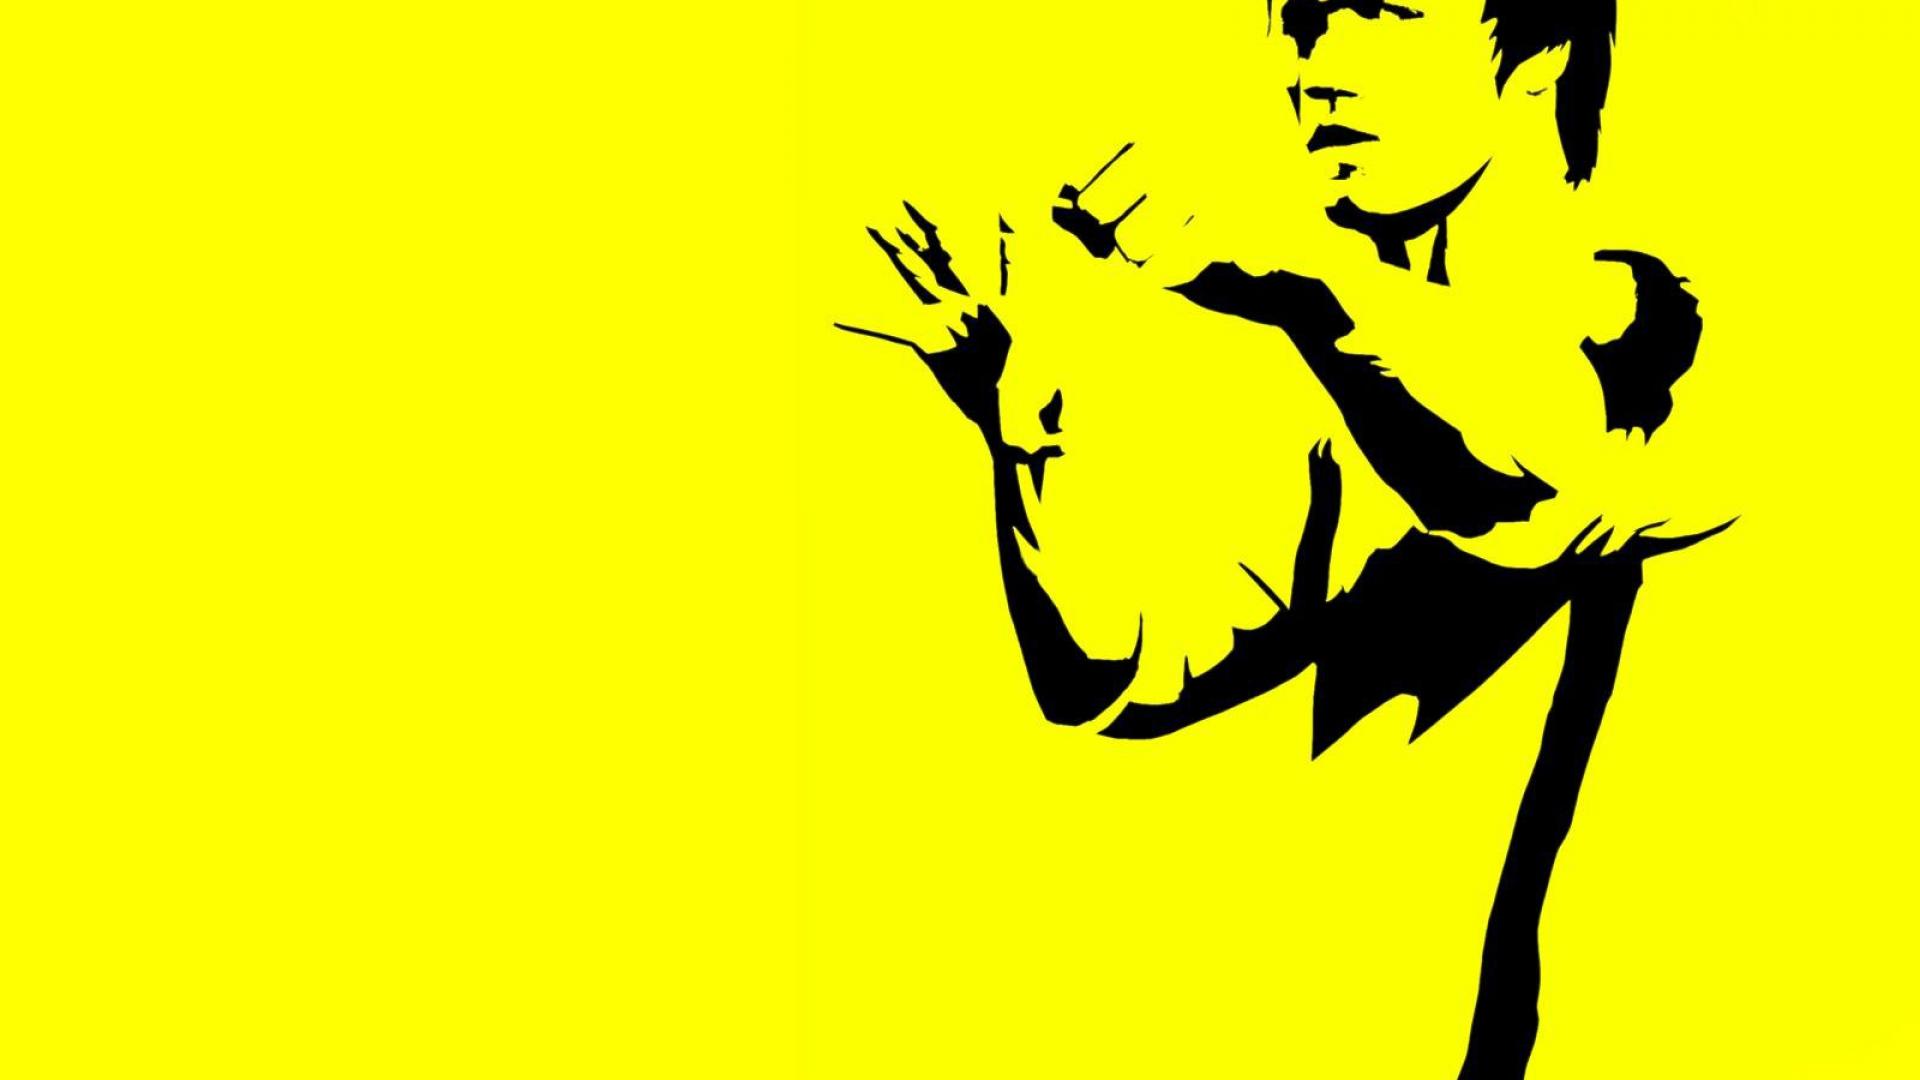 Bruce Lee Wallpapers HD yellow shirt background